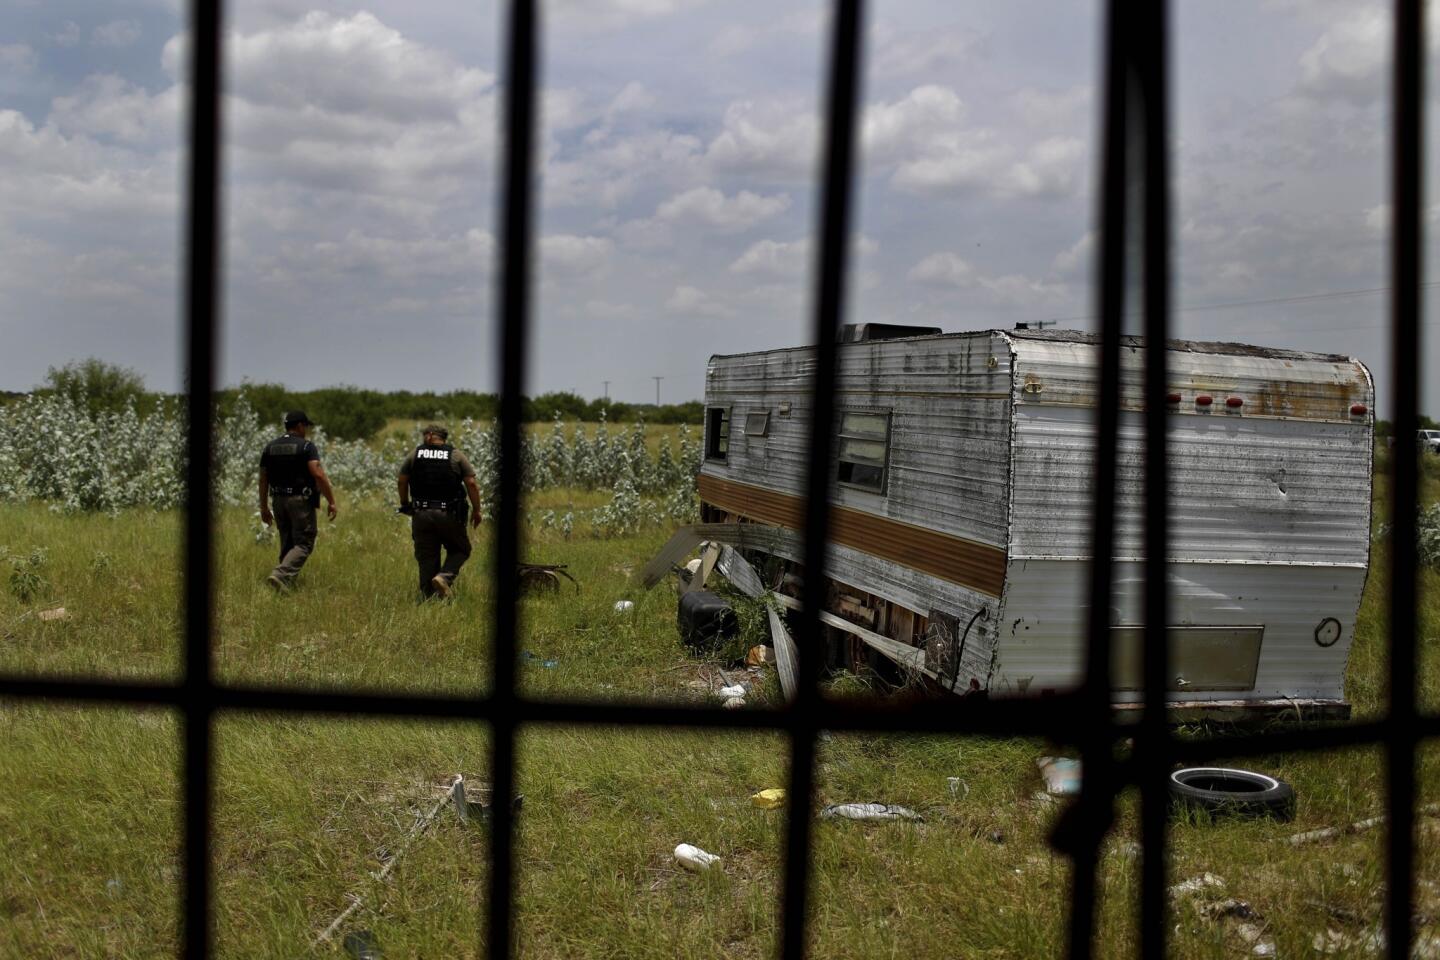 Deputies Domingo Aguirre, left, and Daniel Zamarripa, stand outside an abandoned trailer used by migrants for shelter on their journey north through Texas' Brooks County.